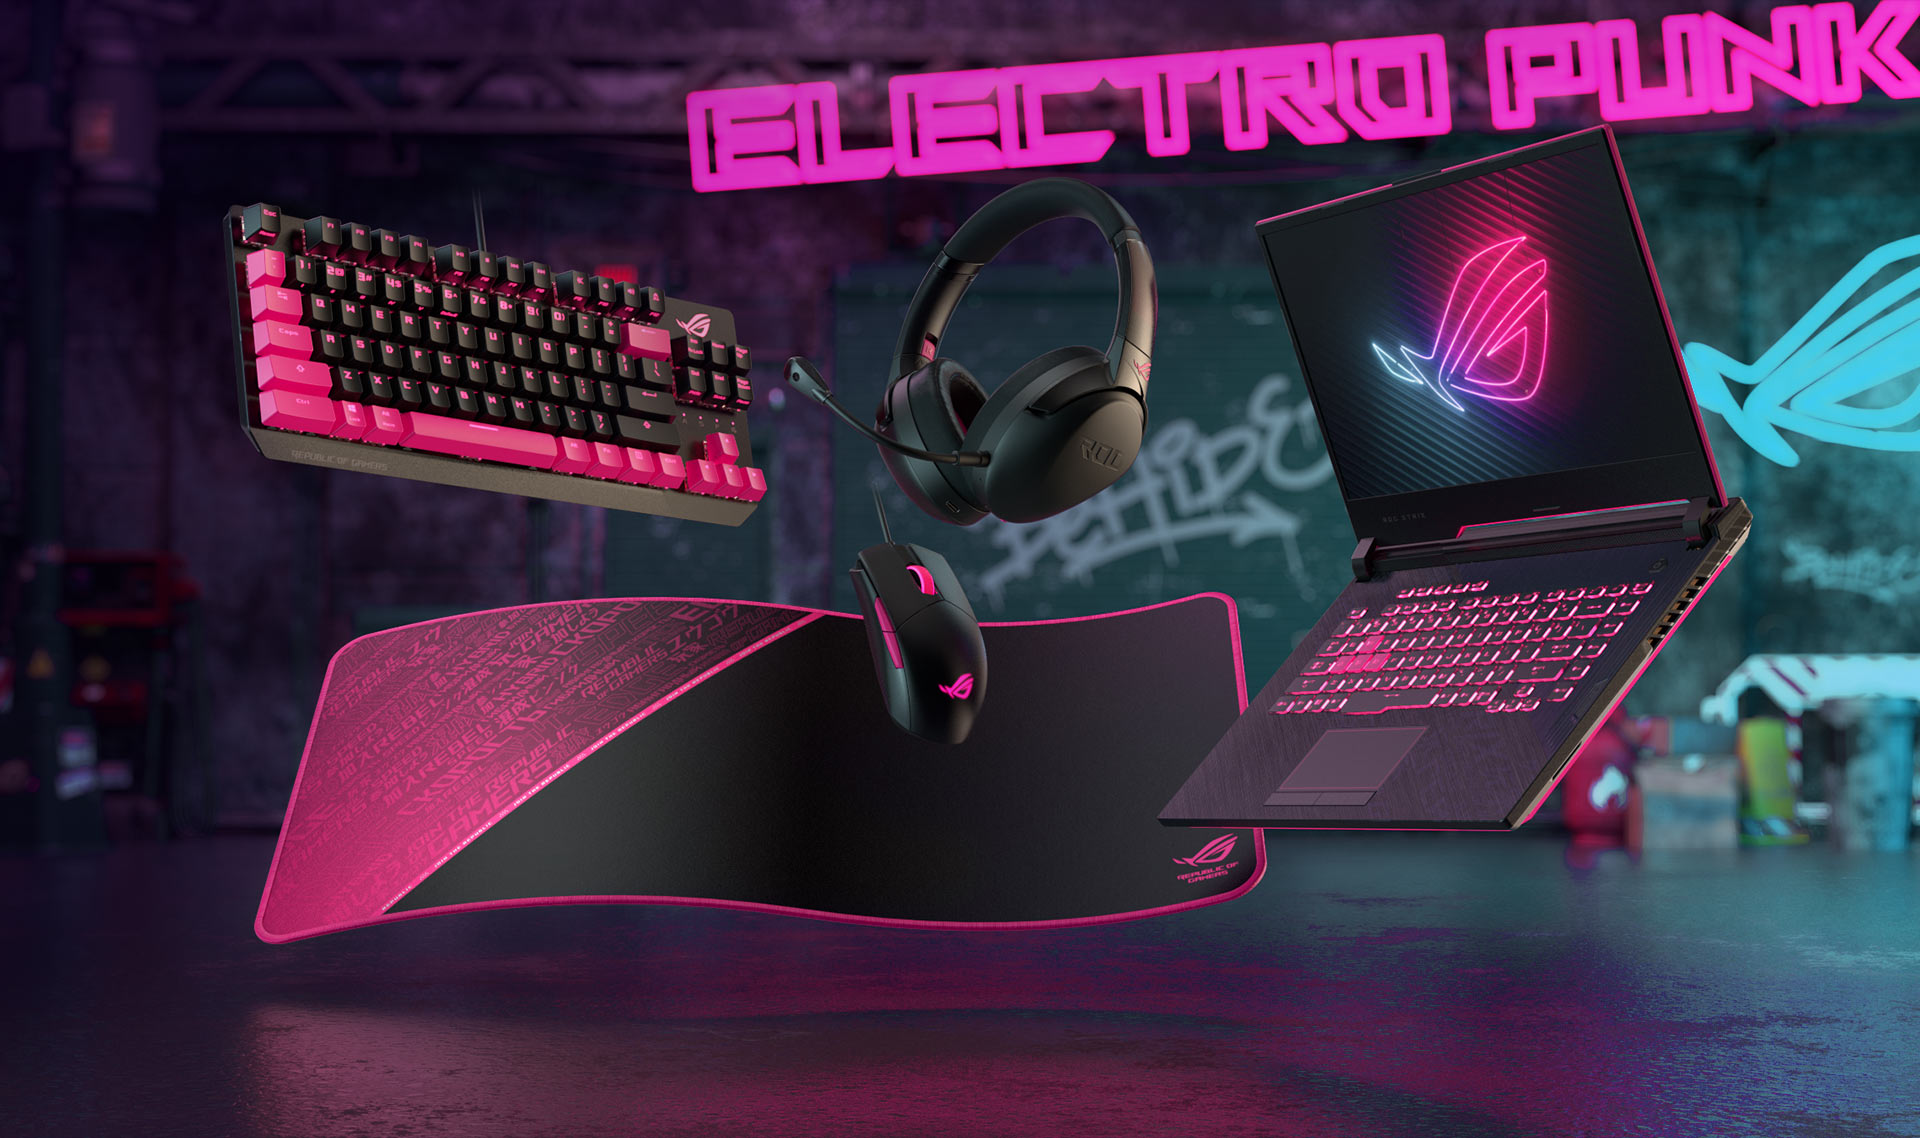 ROG Electro Punk products